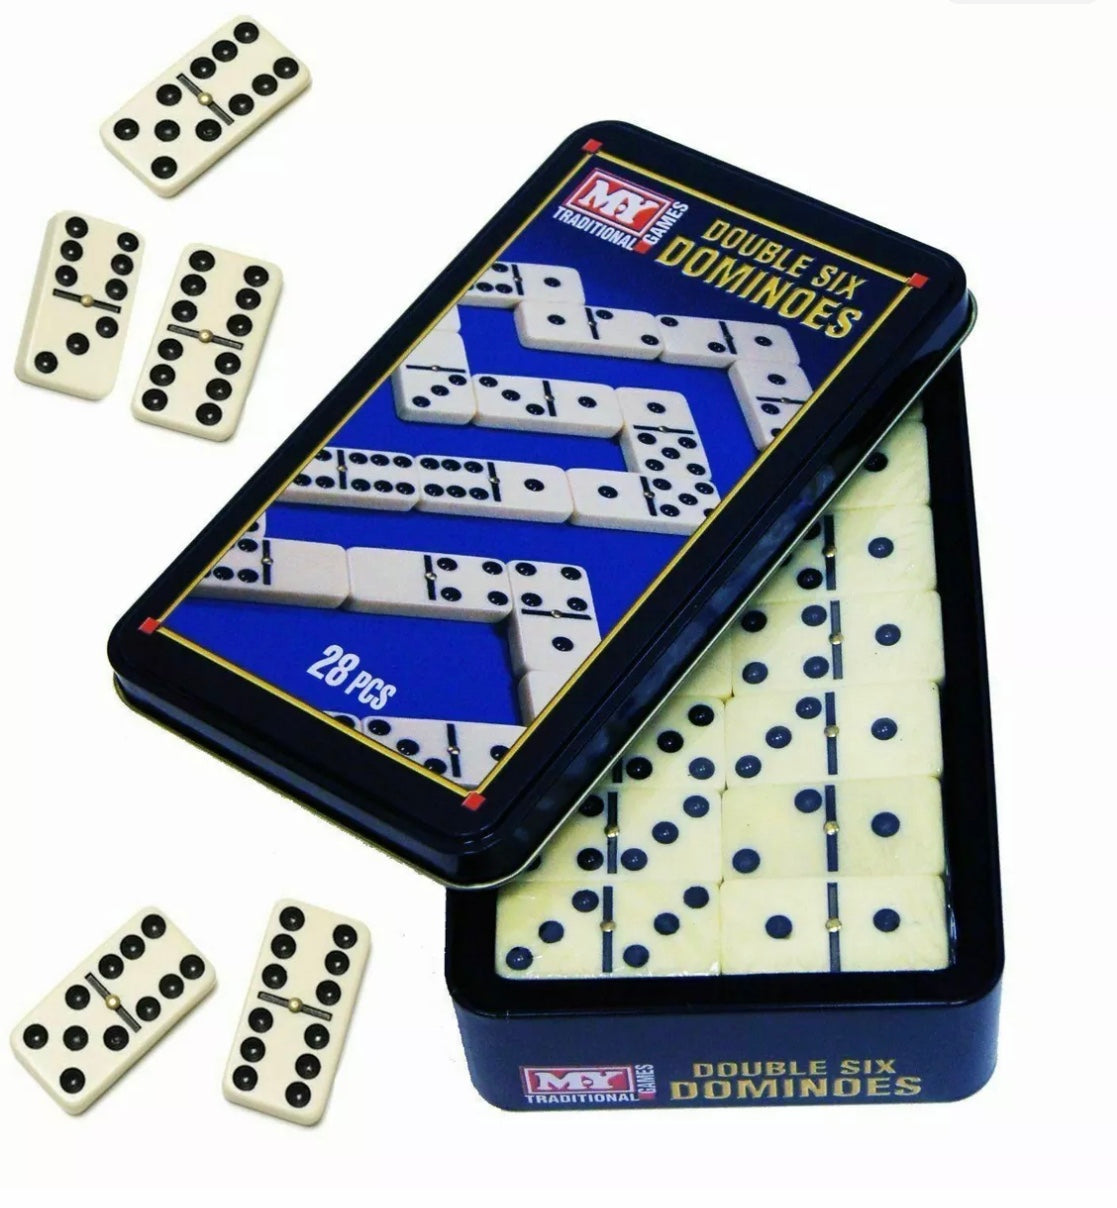 MY Dominoes  Brand: My Domino 28 pcs Double Six 6 Dominoes Set Tin Box Traditional Board Travel Game Toy